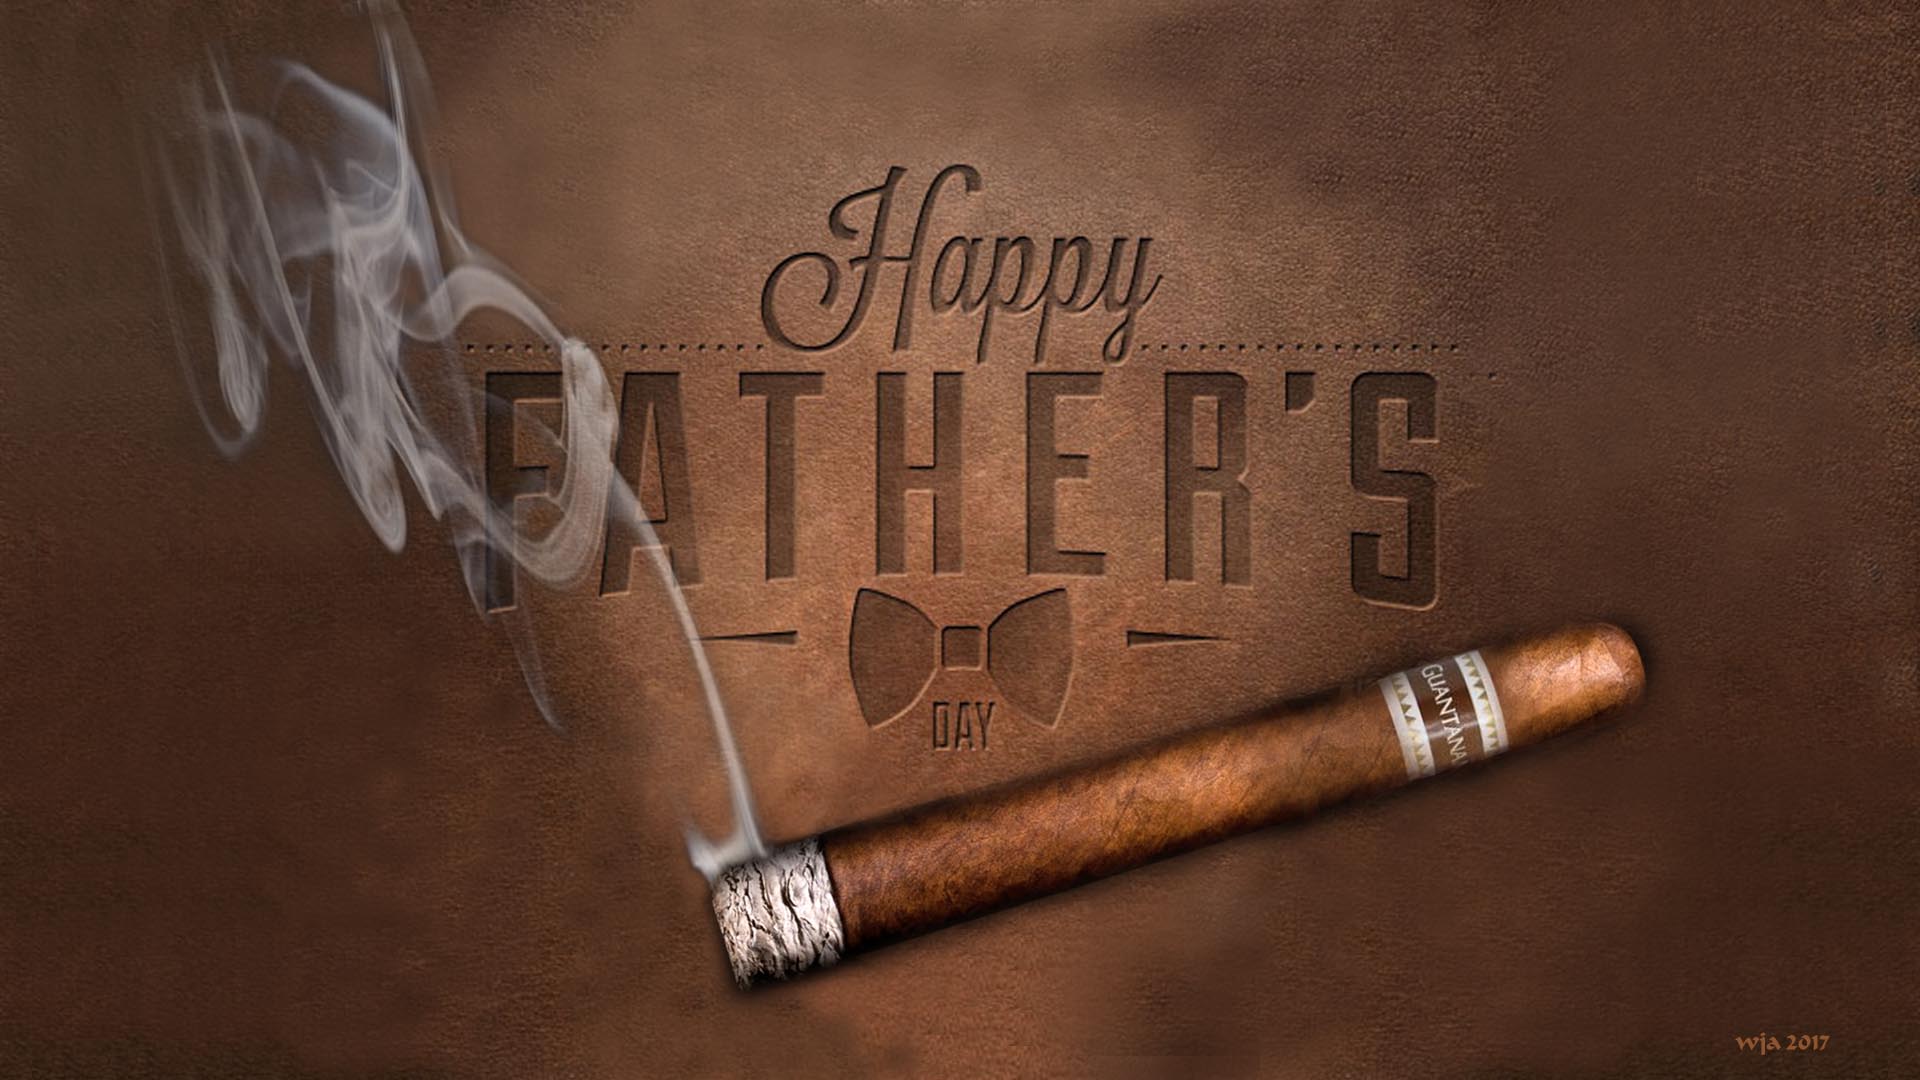 Cigars Wallpapers